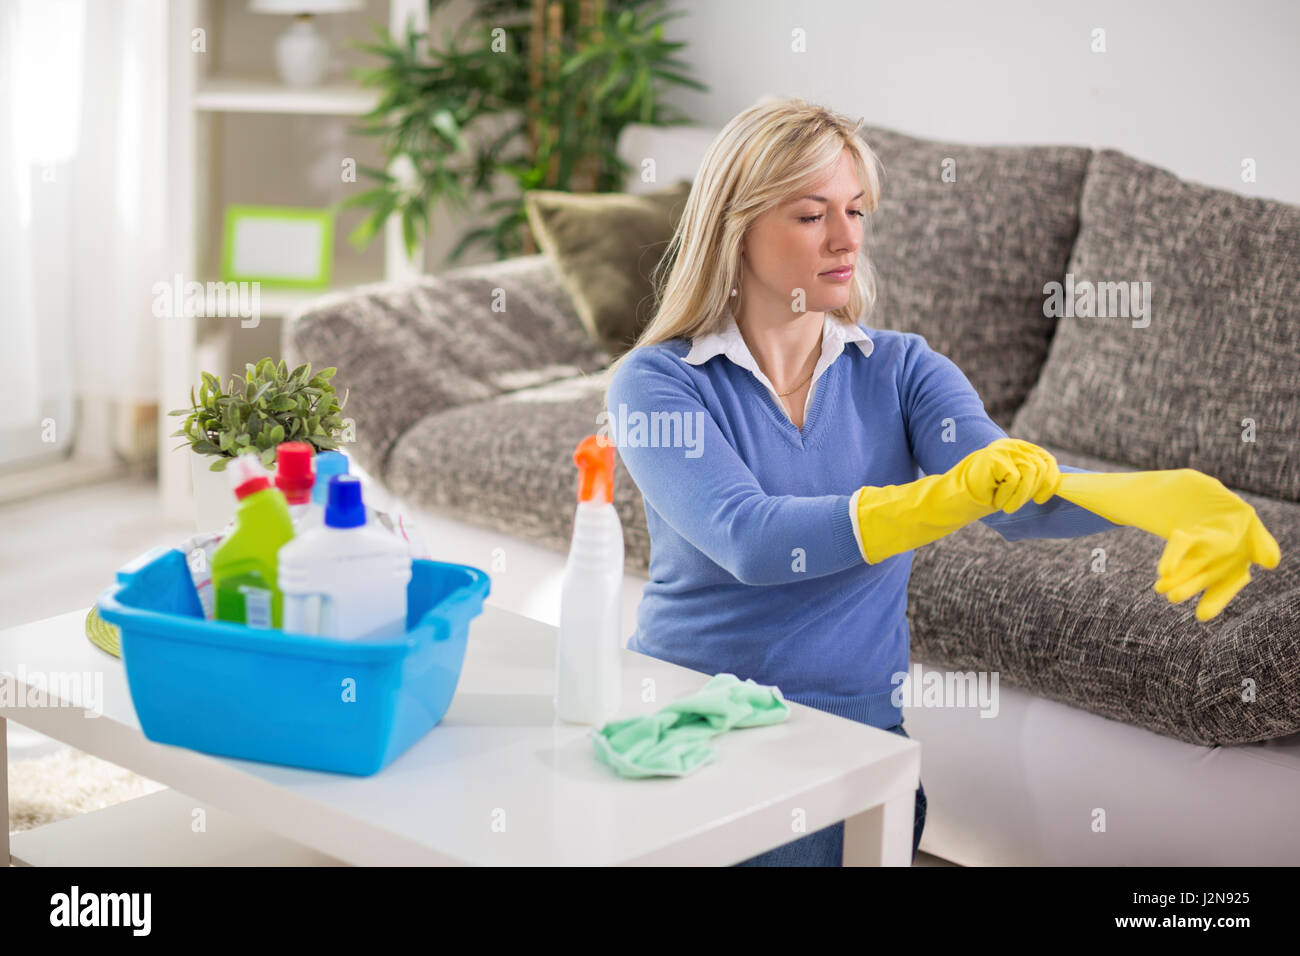 Young woman from cleaning service cleans house Stock Photo